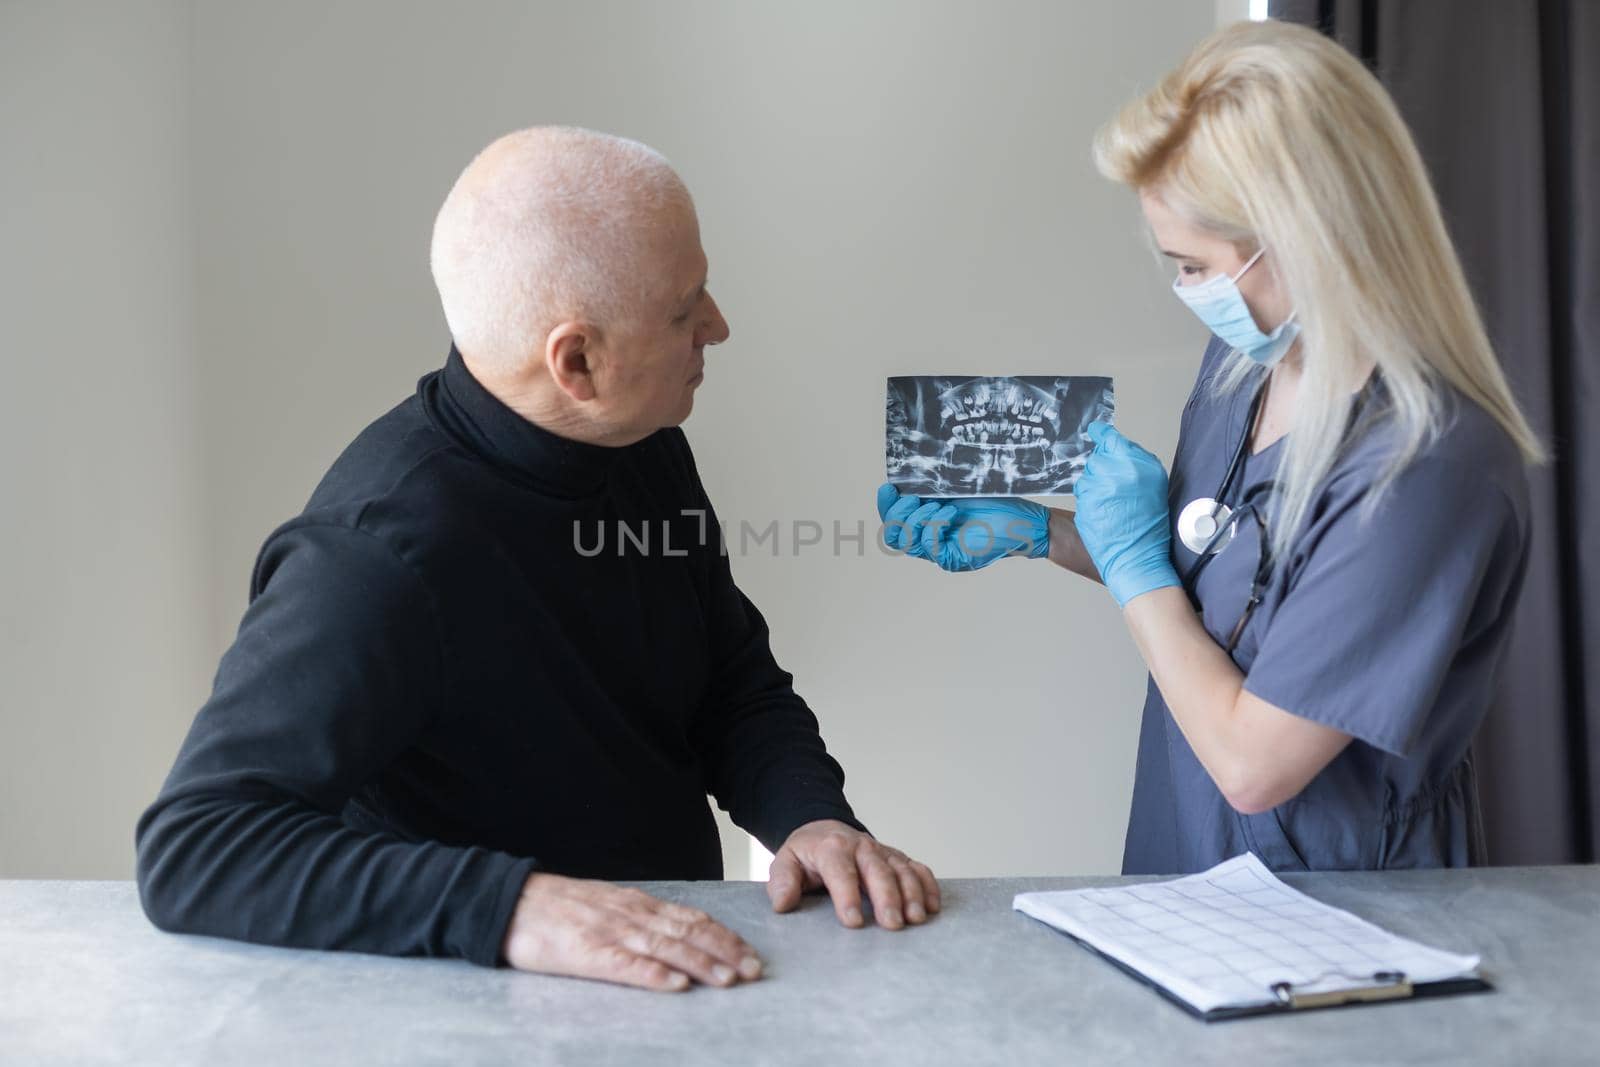 Dental Clinic. An elderly retired gentleman, discussing with his dentist radiography (x-ray) results